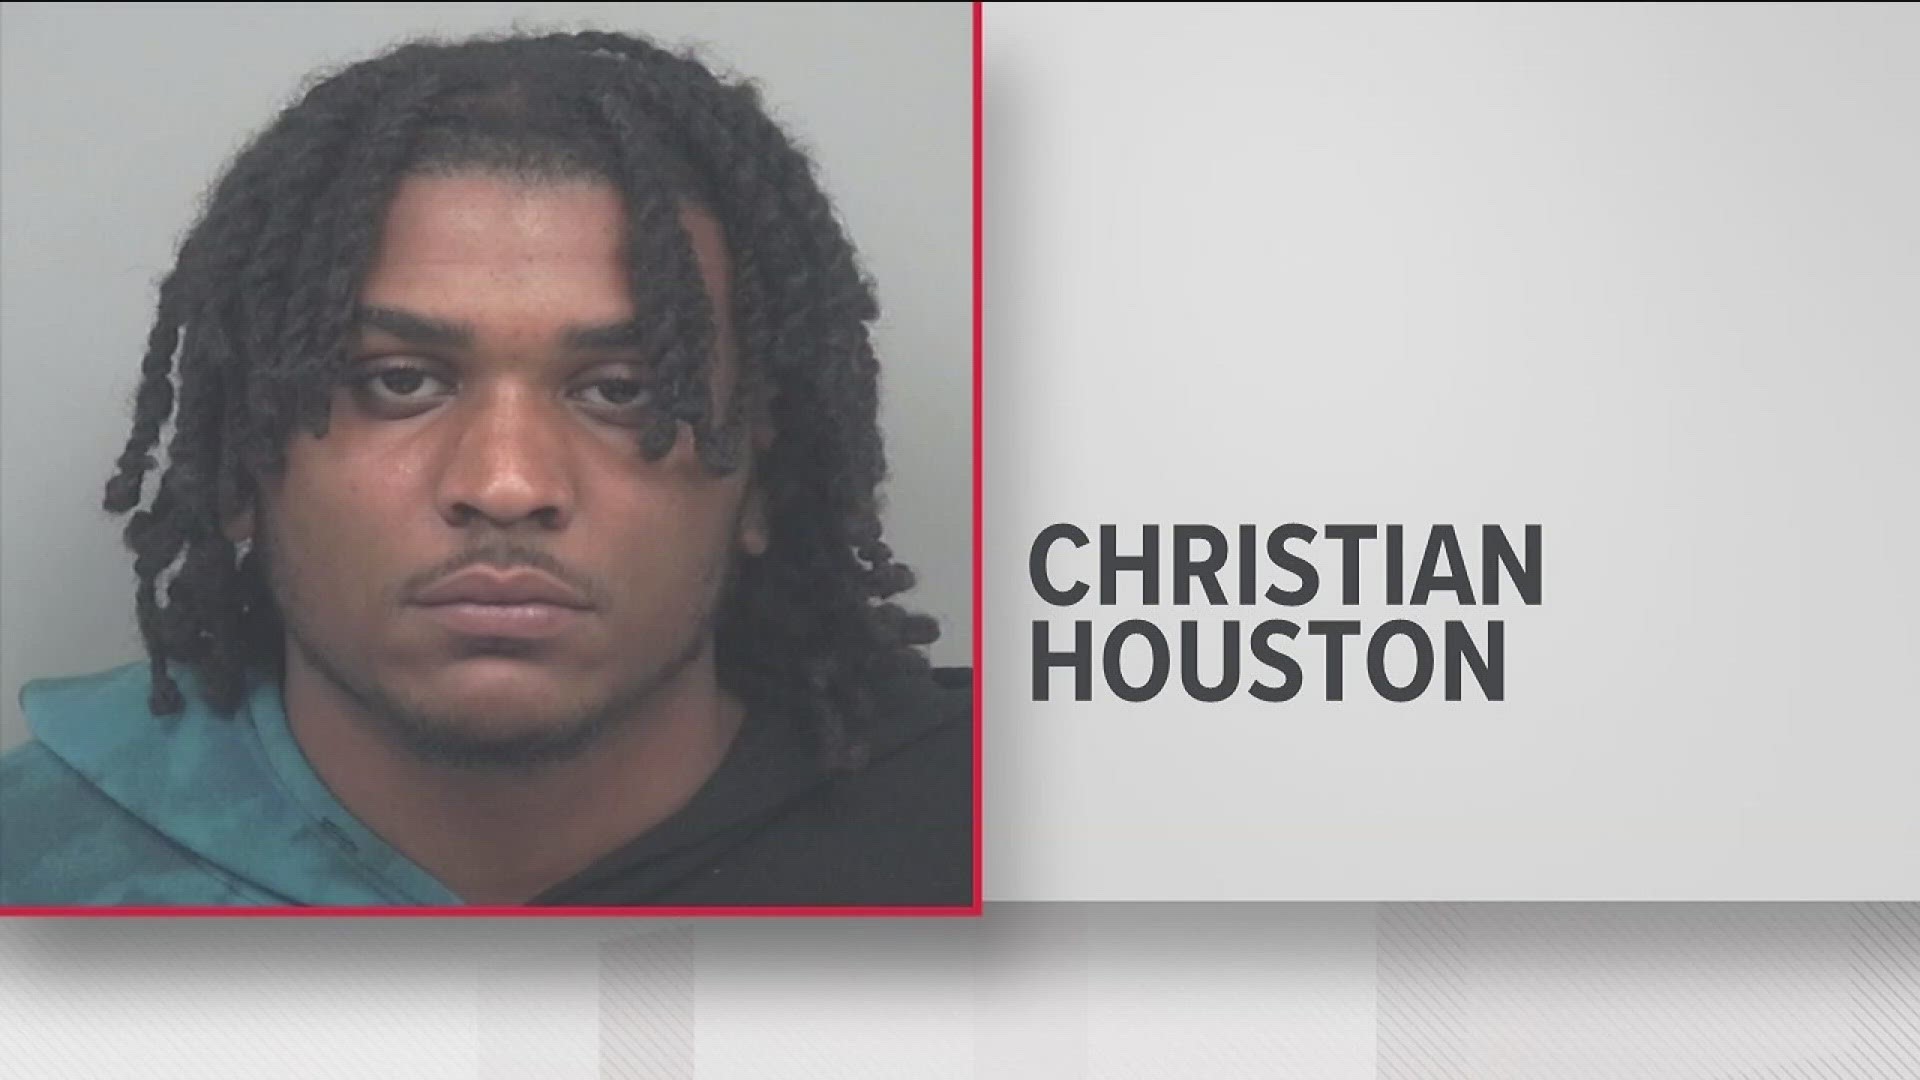 Detectives said 19-year-old Christian Houston is being charged with felony murder, among other crimes.